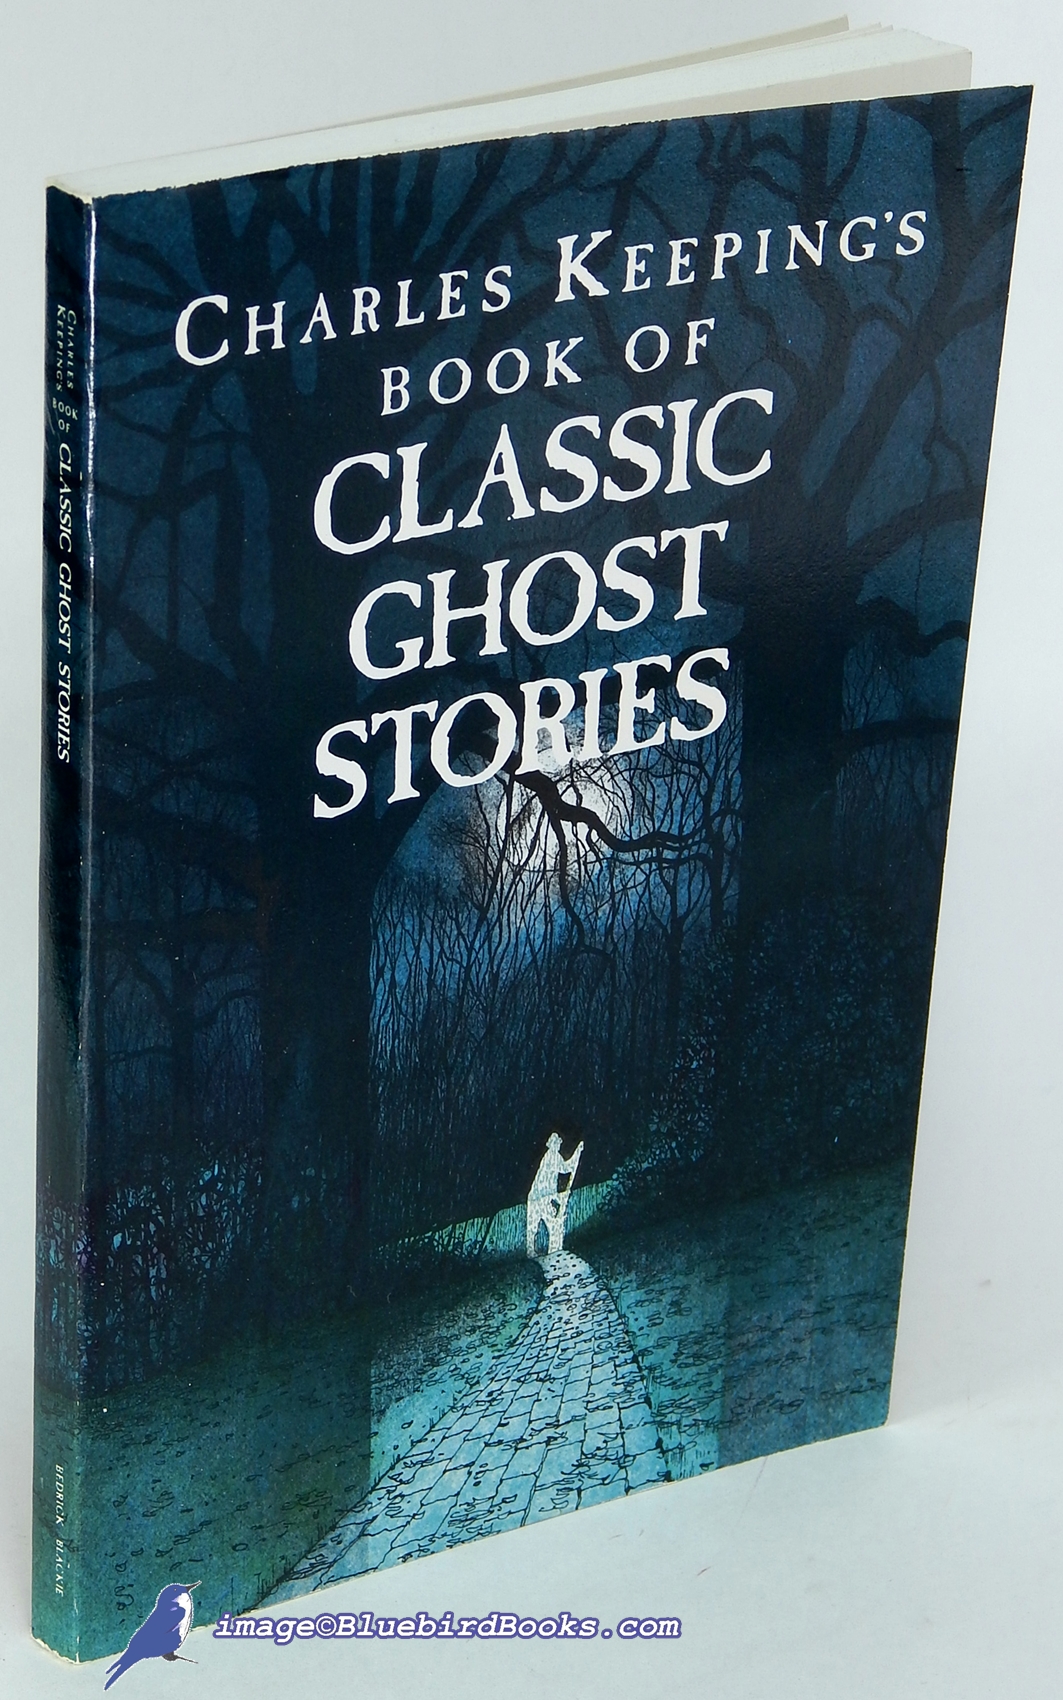 KEEPING, CHARLES (EDITOR) - Charles Keeping's Book of Classic Ghost Stories